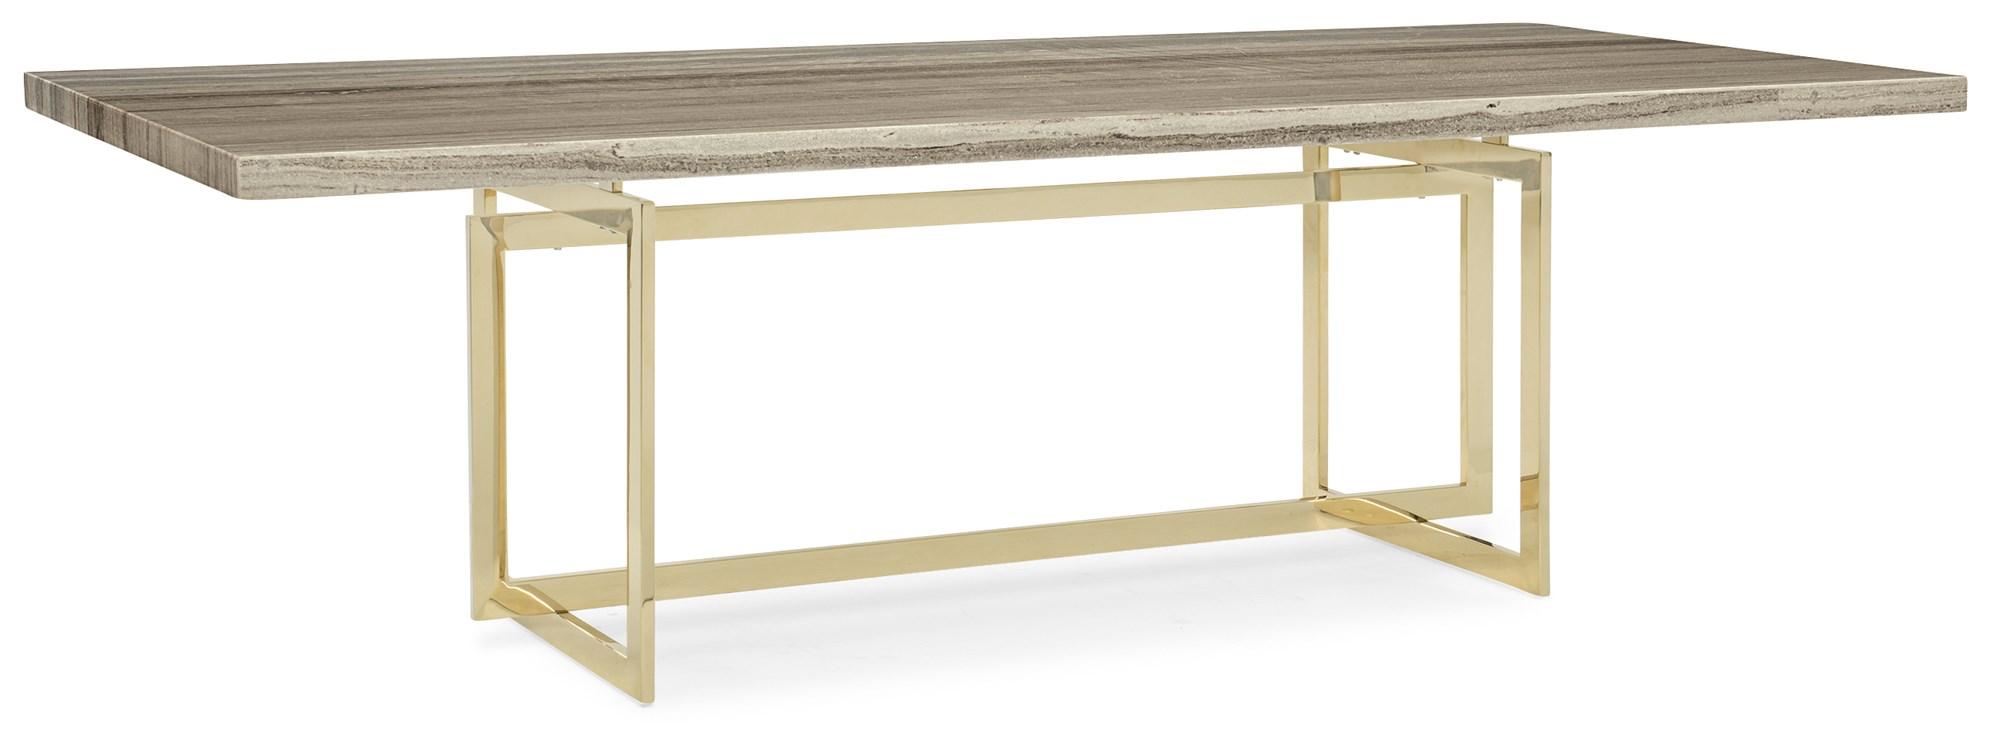 Traditional Dining Table WISH YOU WERE HERE CLA-019-203 in Stone, Gold 